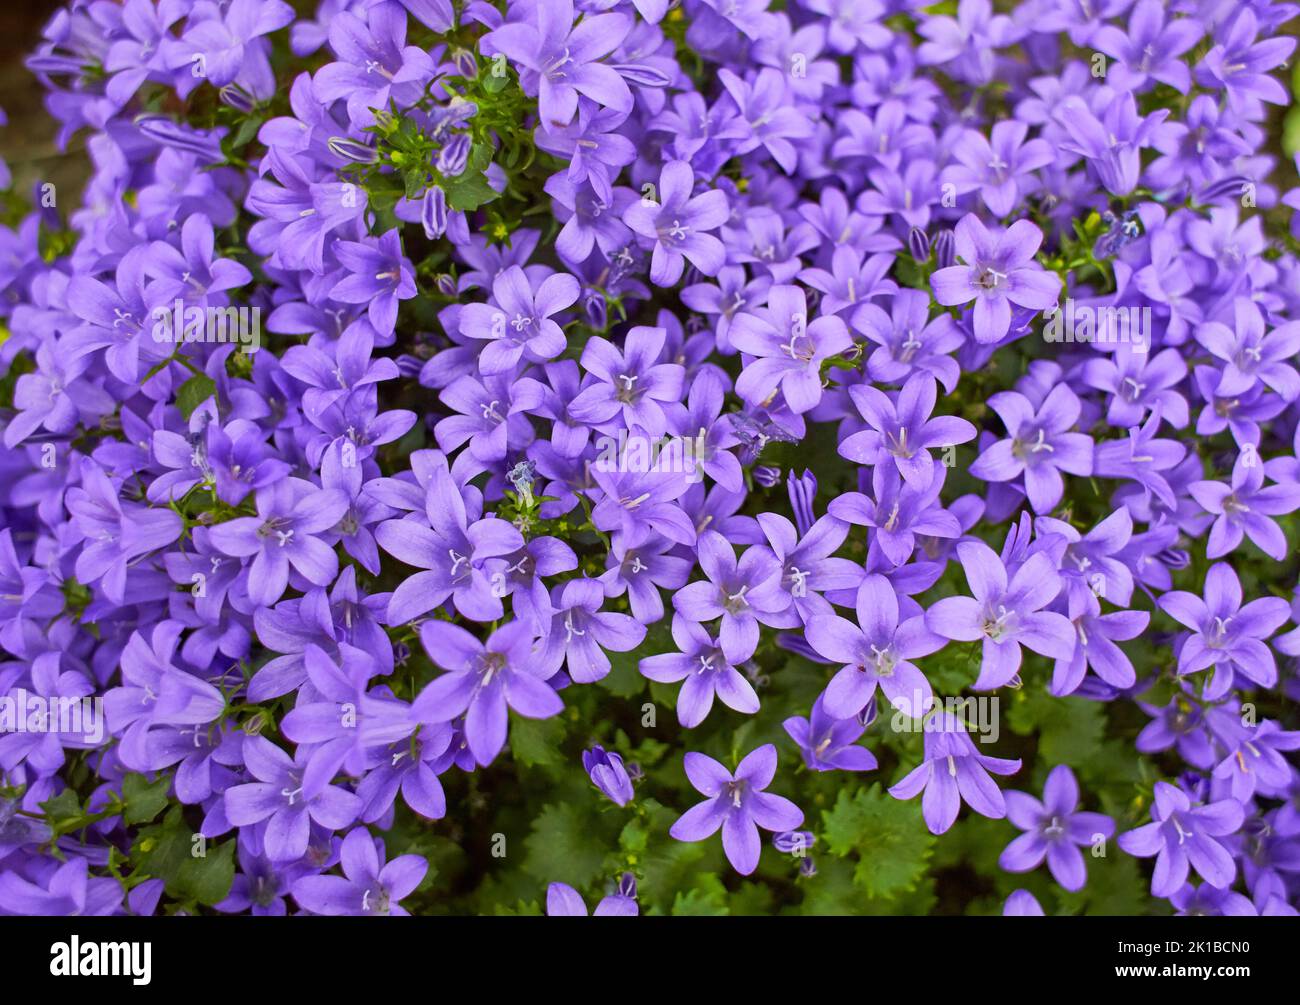 Purple flowers of Dalmatian bellflower or Adria bellflower or Wall bellflower (Campanula portenschlagiana) blooming on blurred background garden. lila Stock Photo